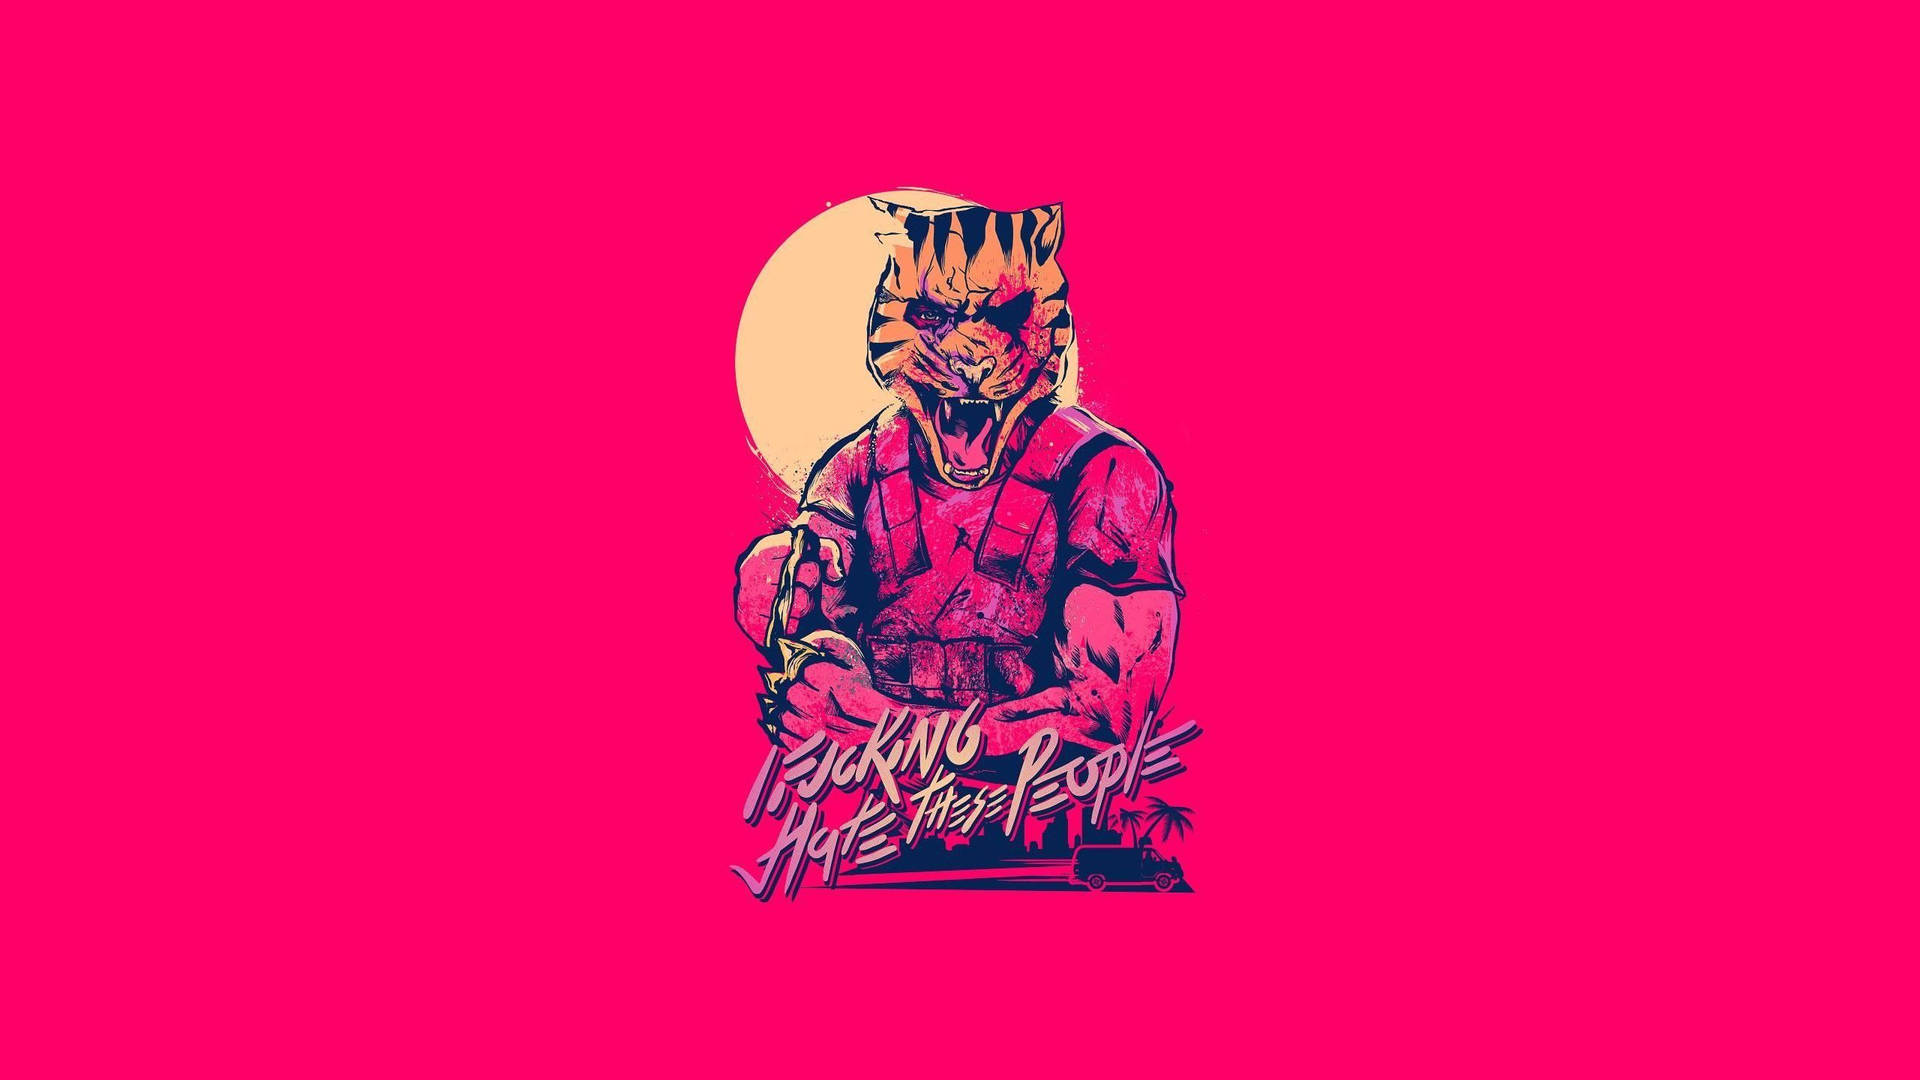 Top 999+ Hotline Miami Wallpapers Full HD, 4K✅Free to Use